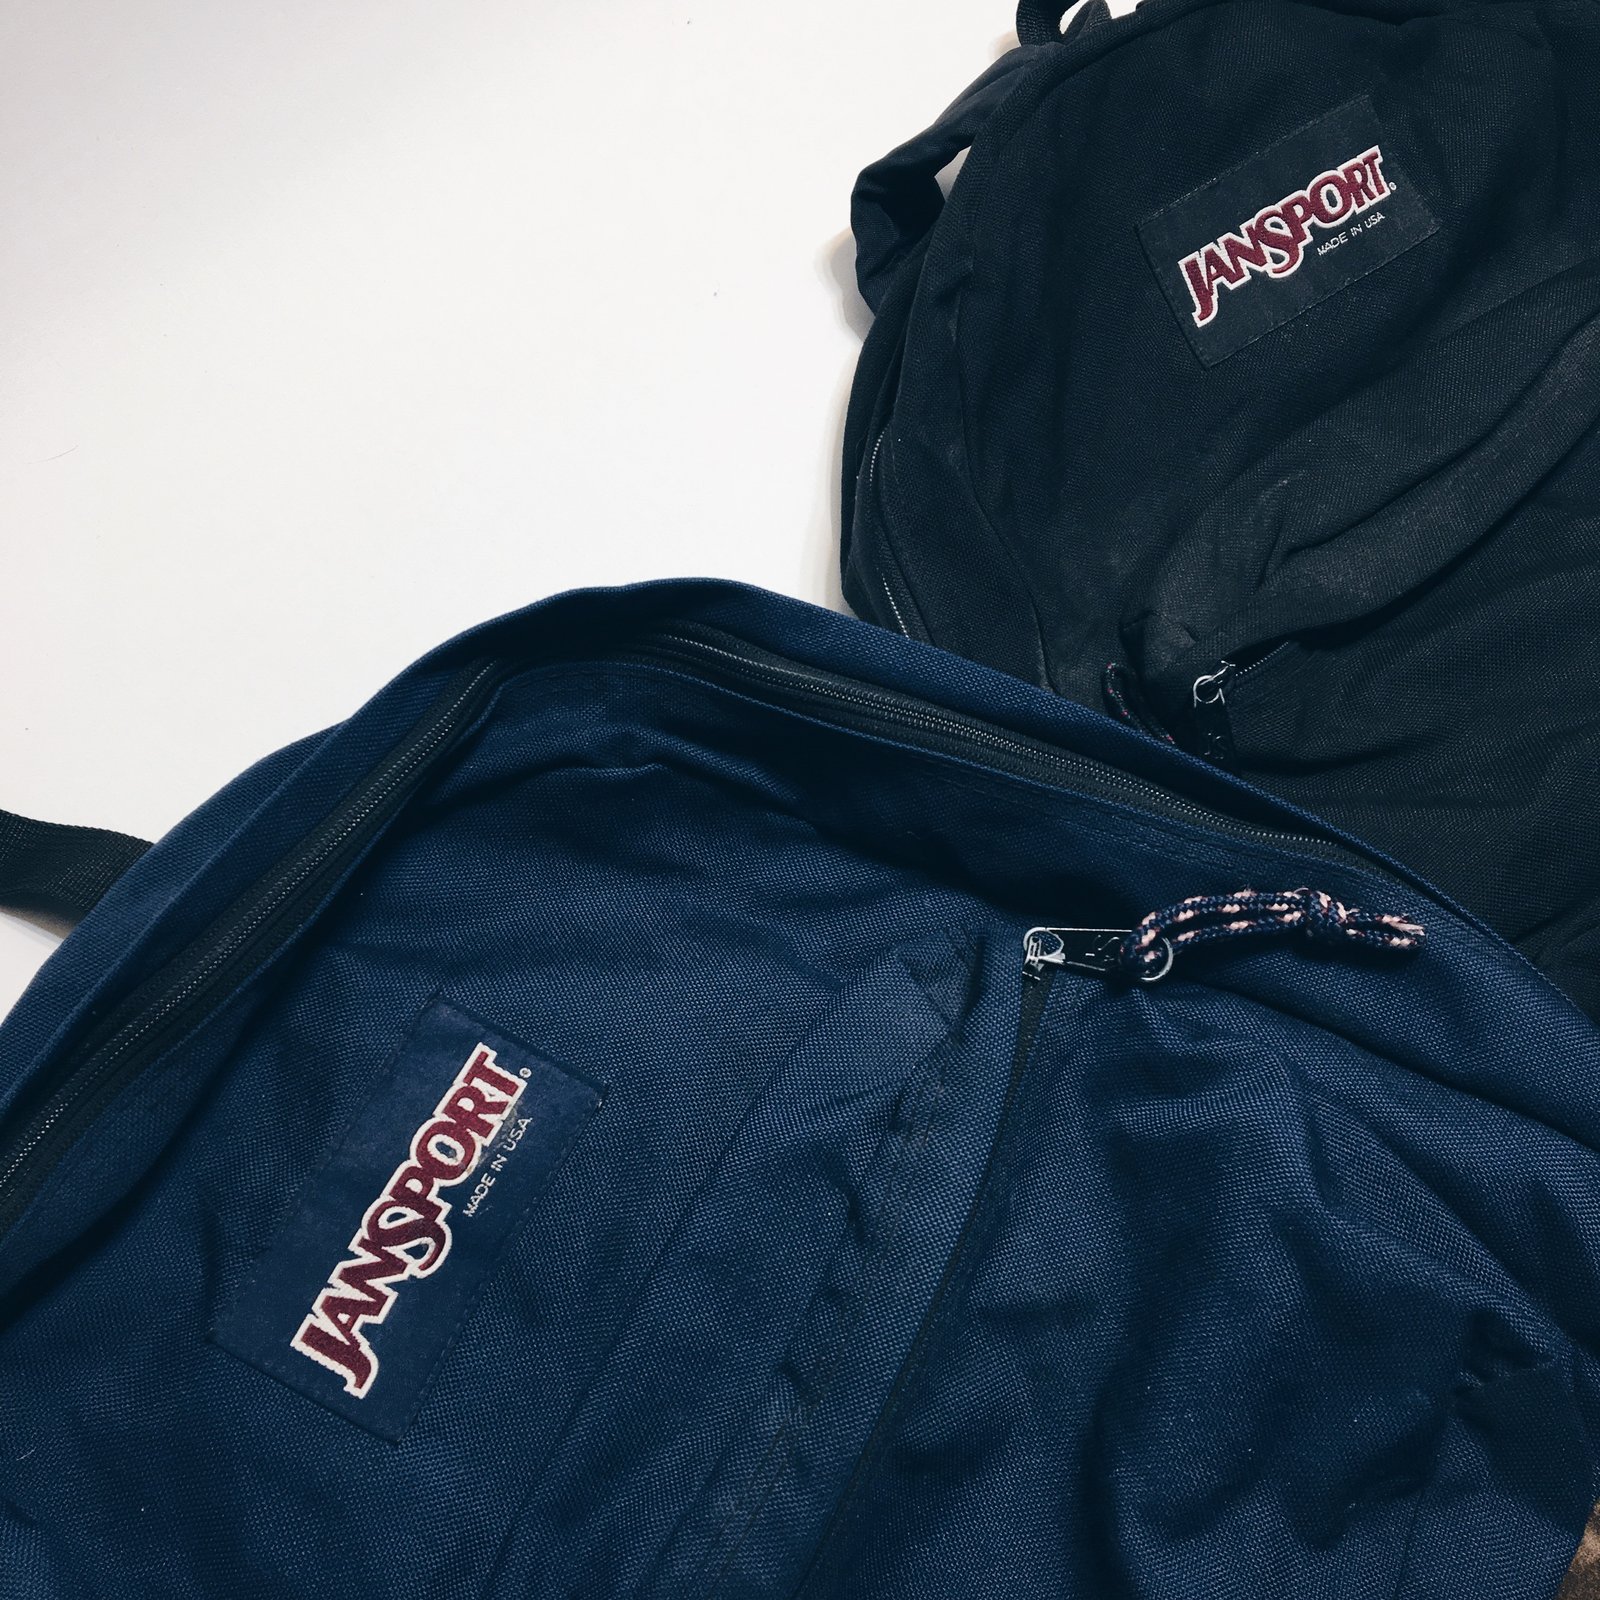 jansport made in